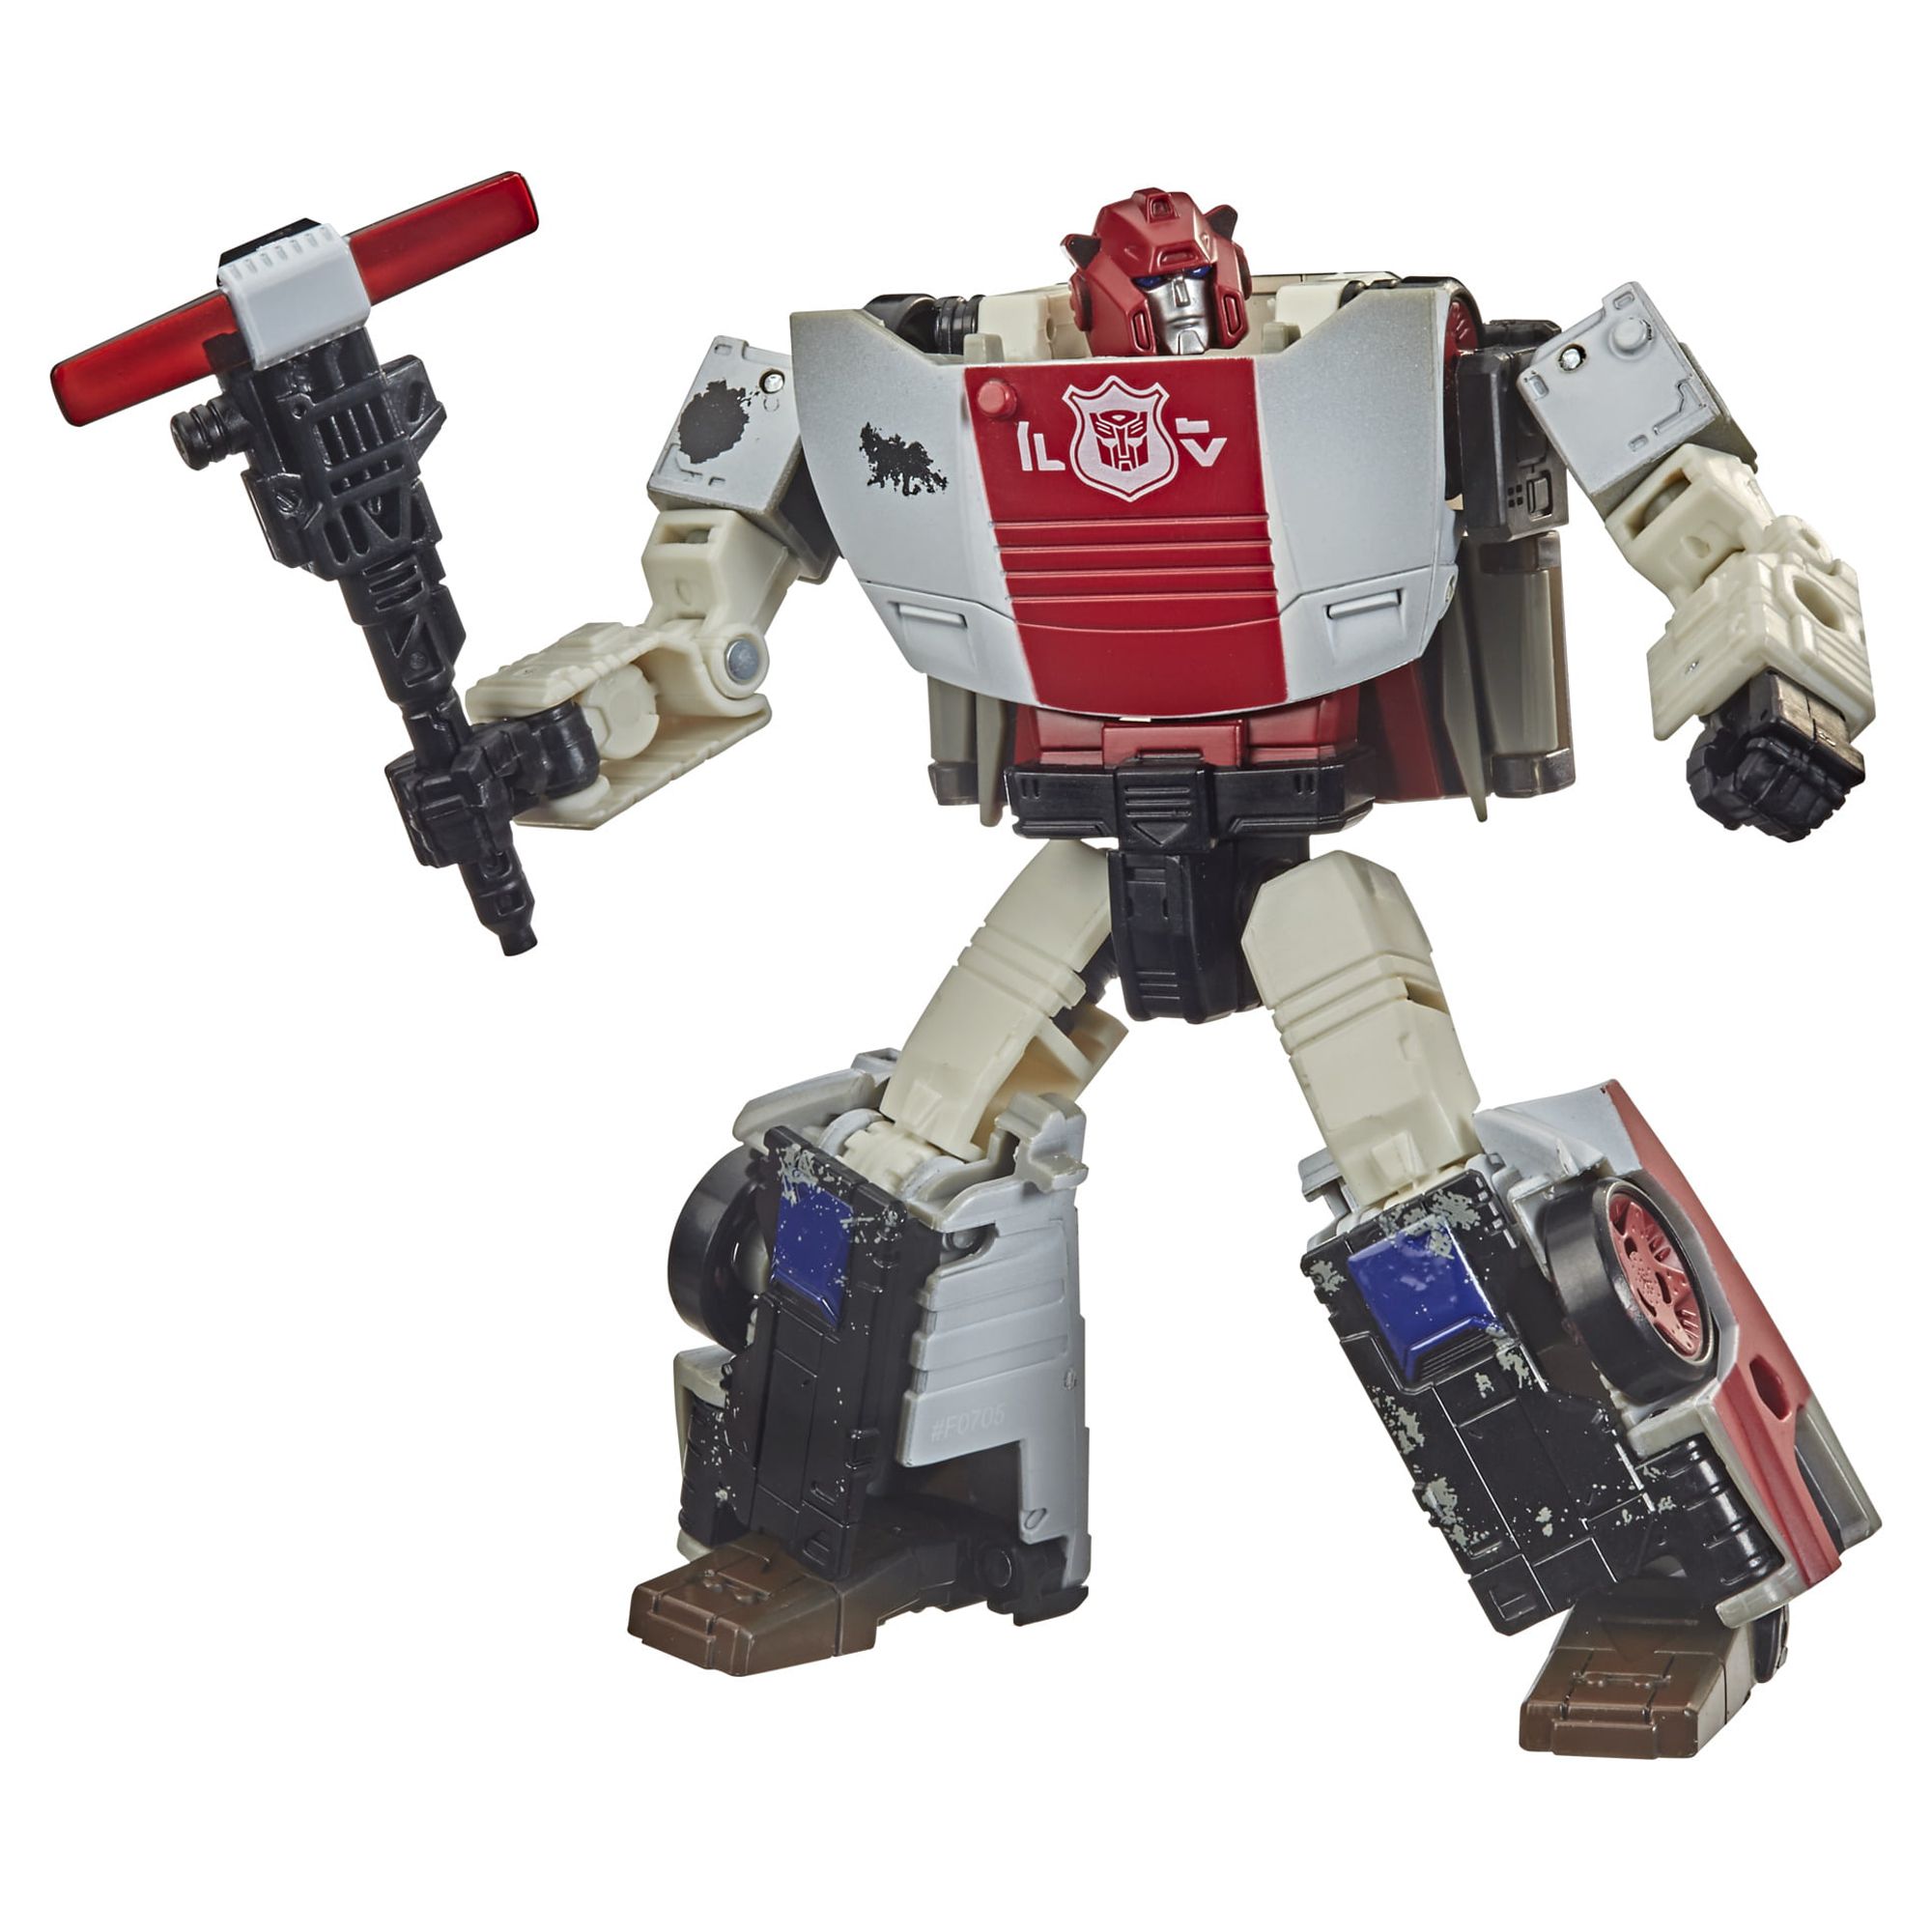 Transformers Generations War for Cybertron Series Deluxe Red Alert, Walmart Exclusive - image 5 of 6